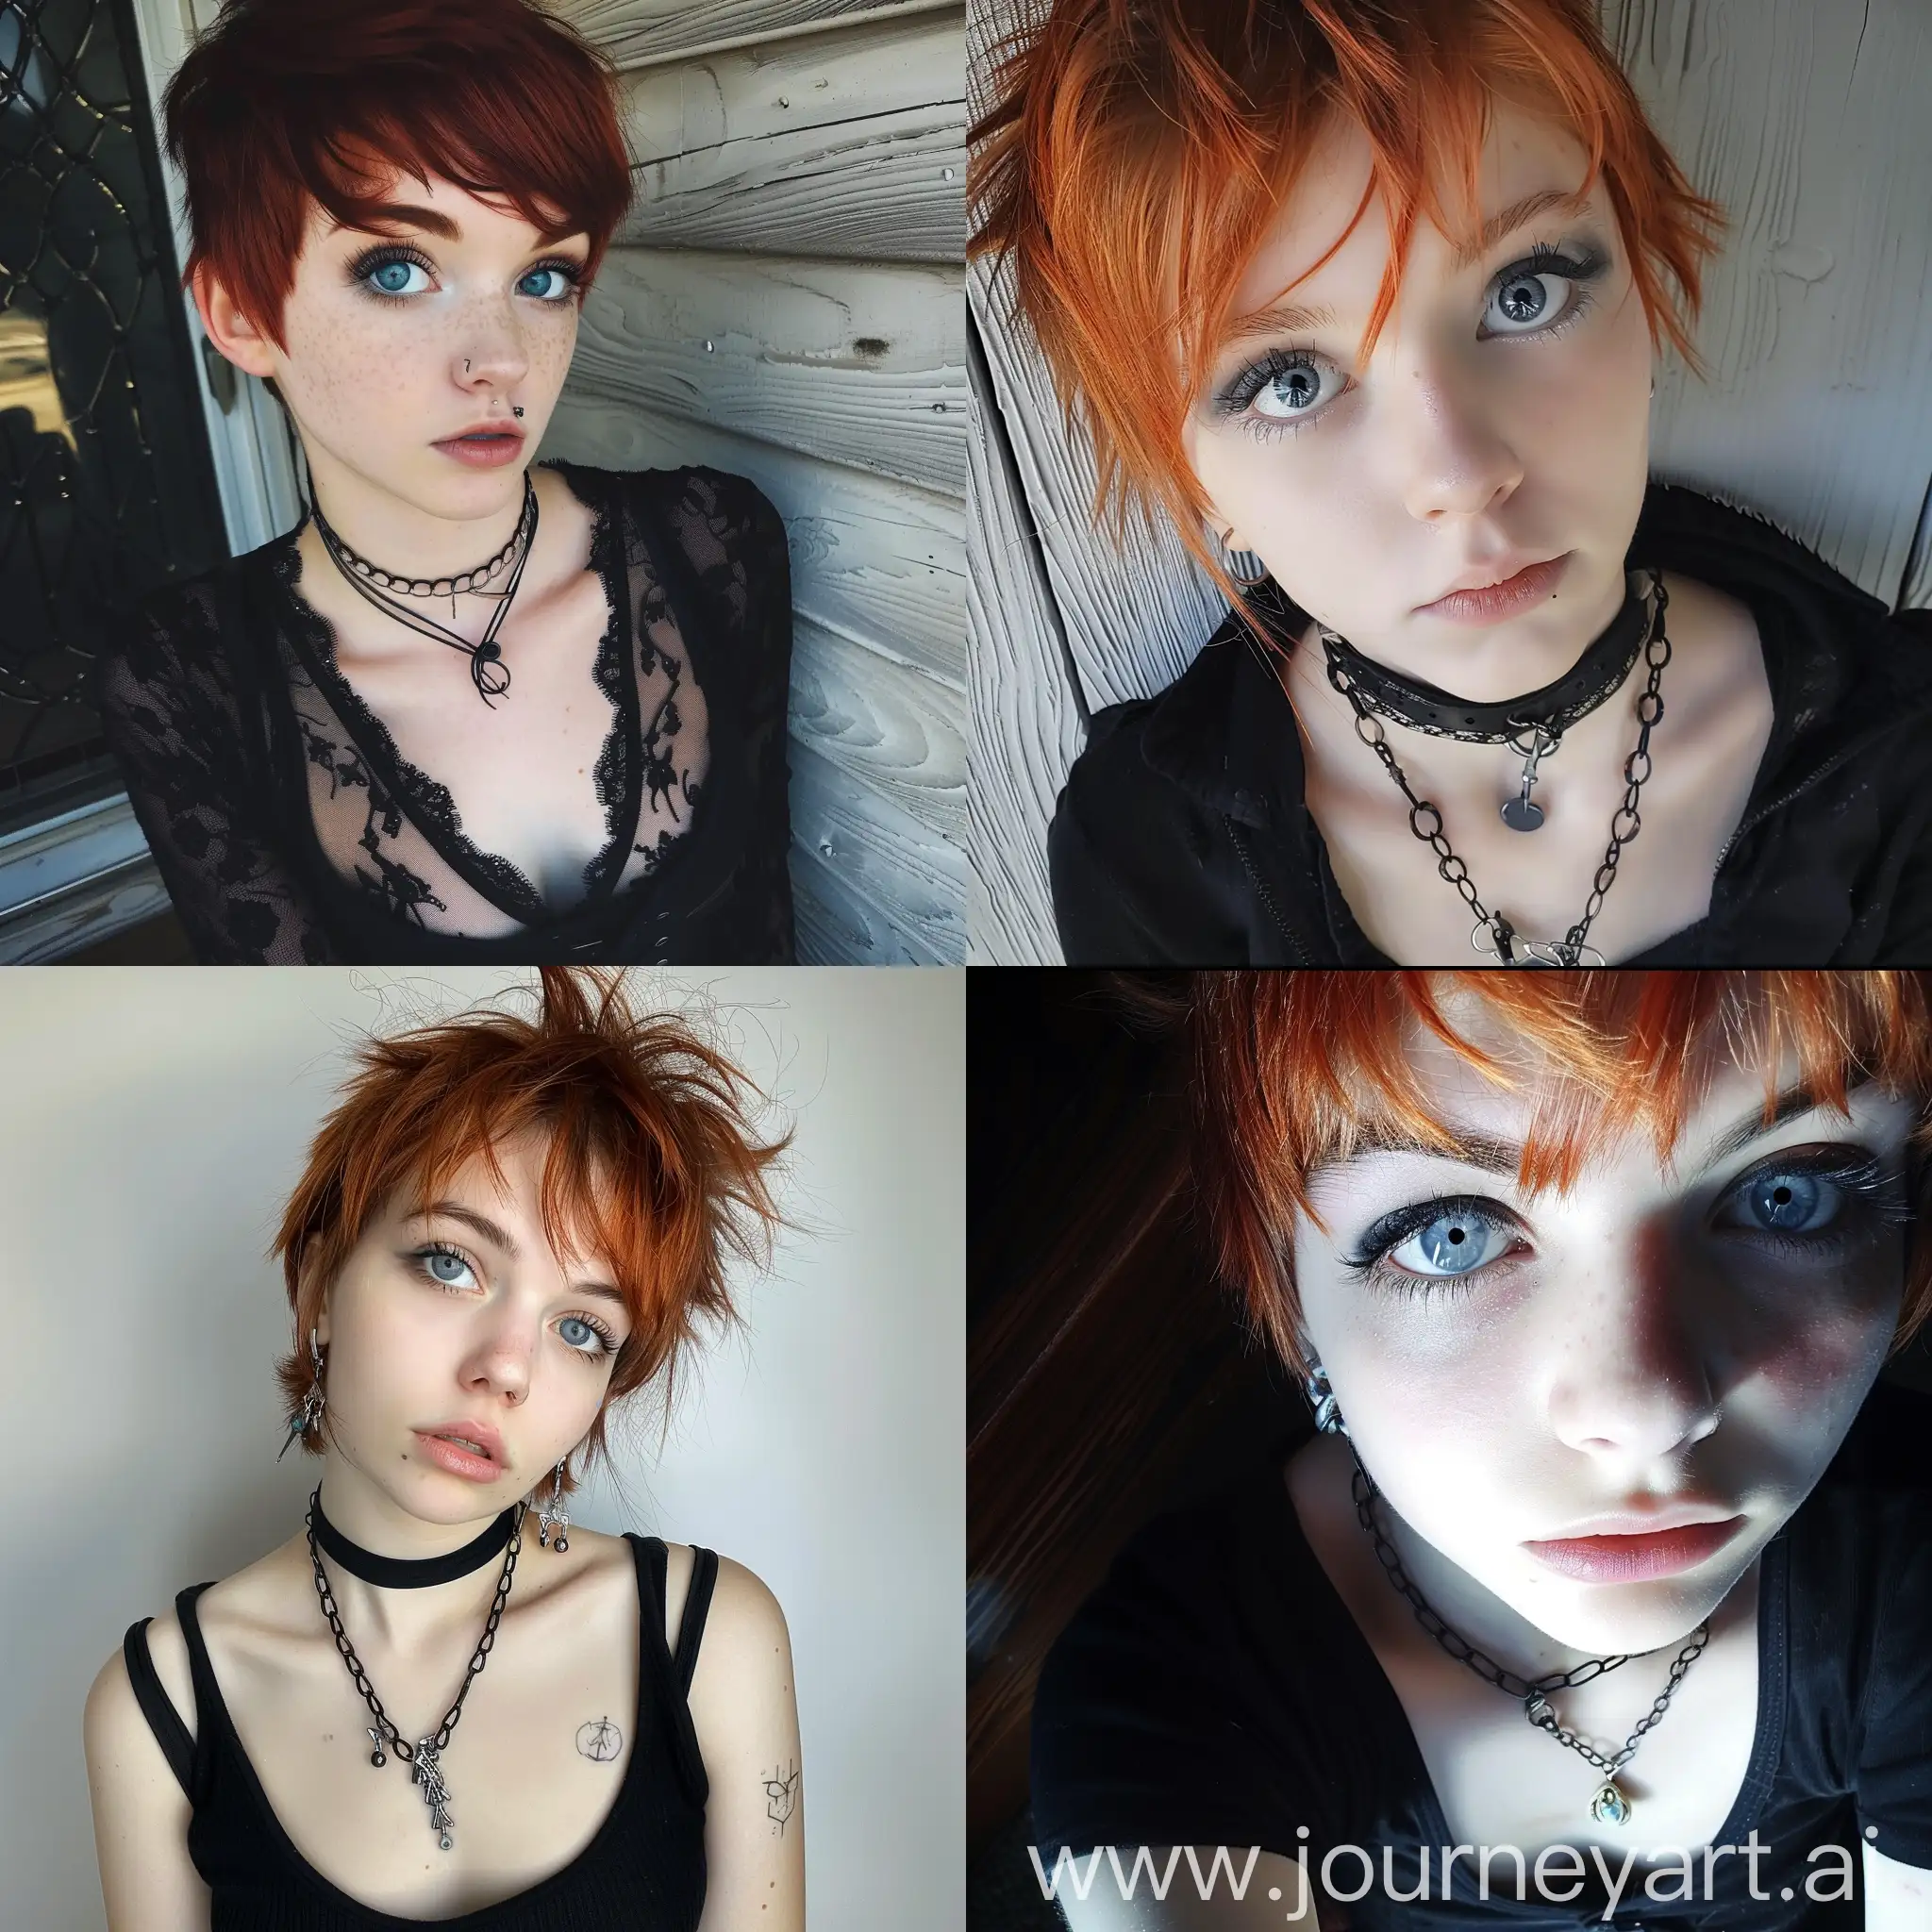 Goth-Teenage-Girl-with-Pixie-Cut-and-Red-Hair-Staring-Intensely